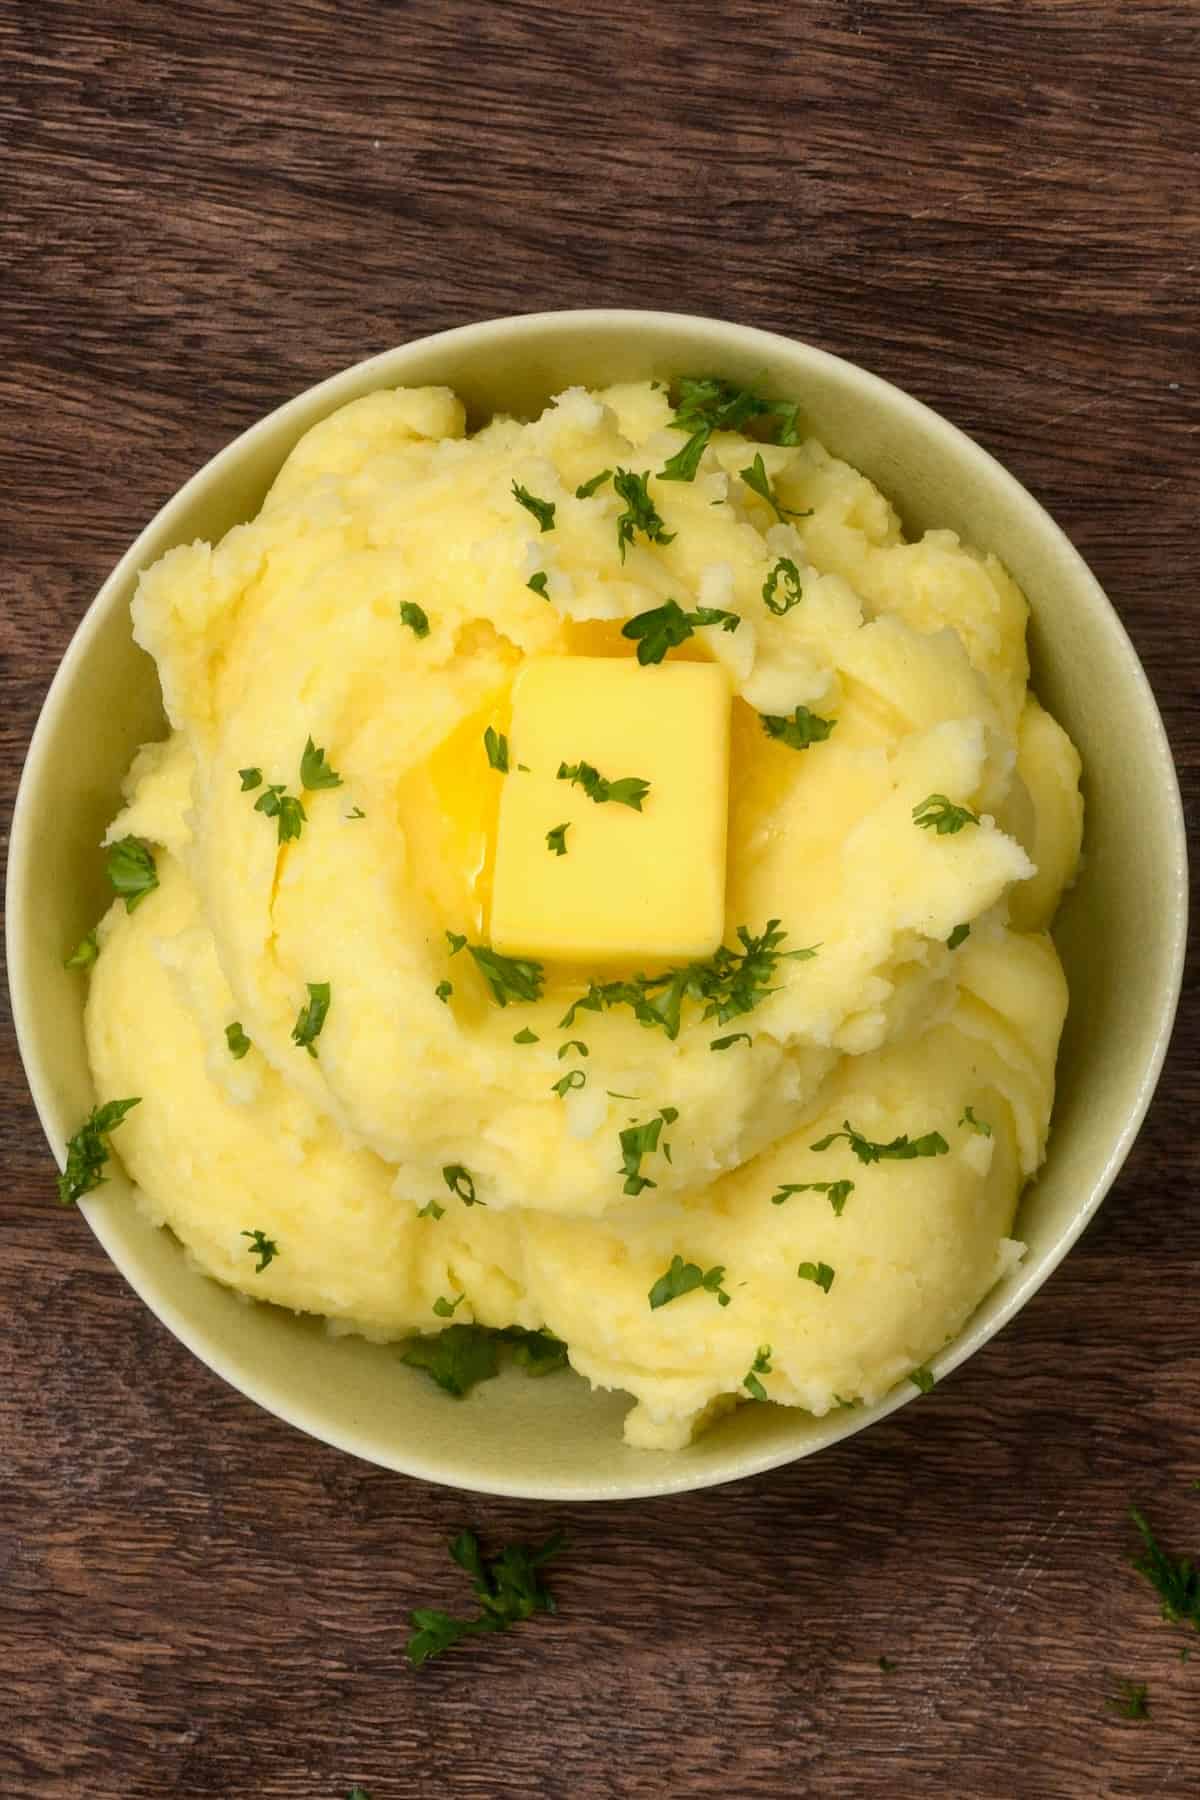 Creamy mashed potatoes topped with butter and parsley